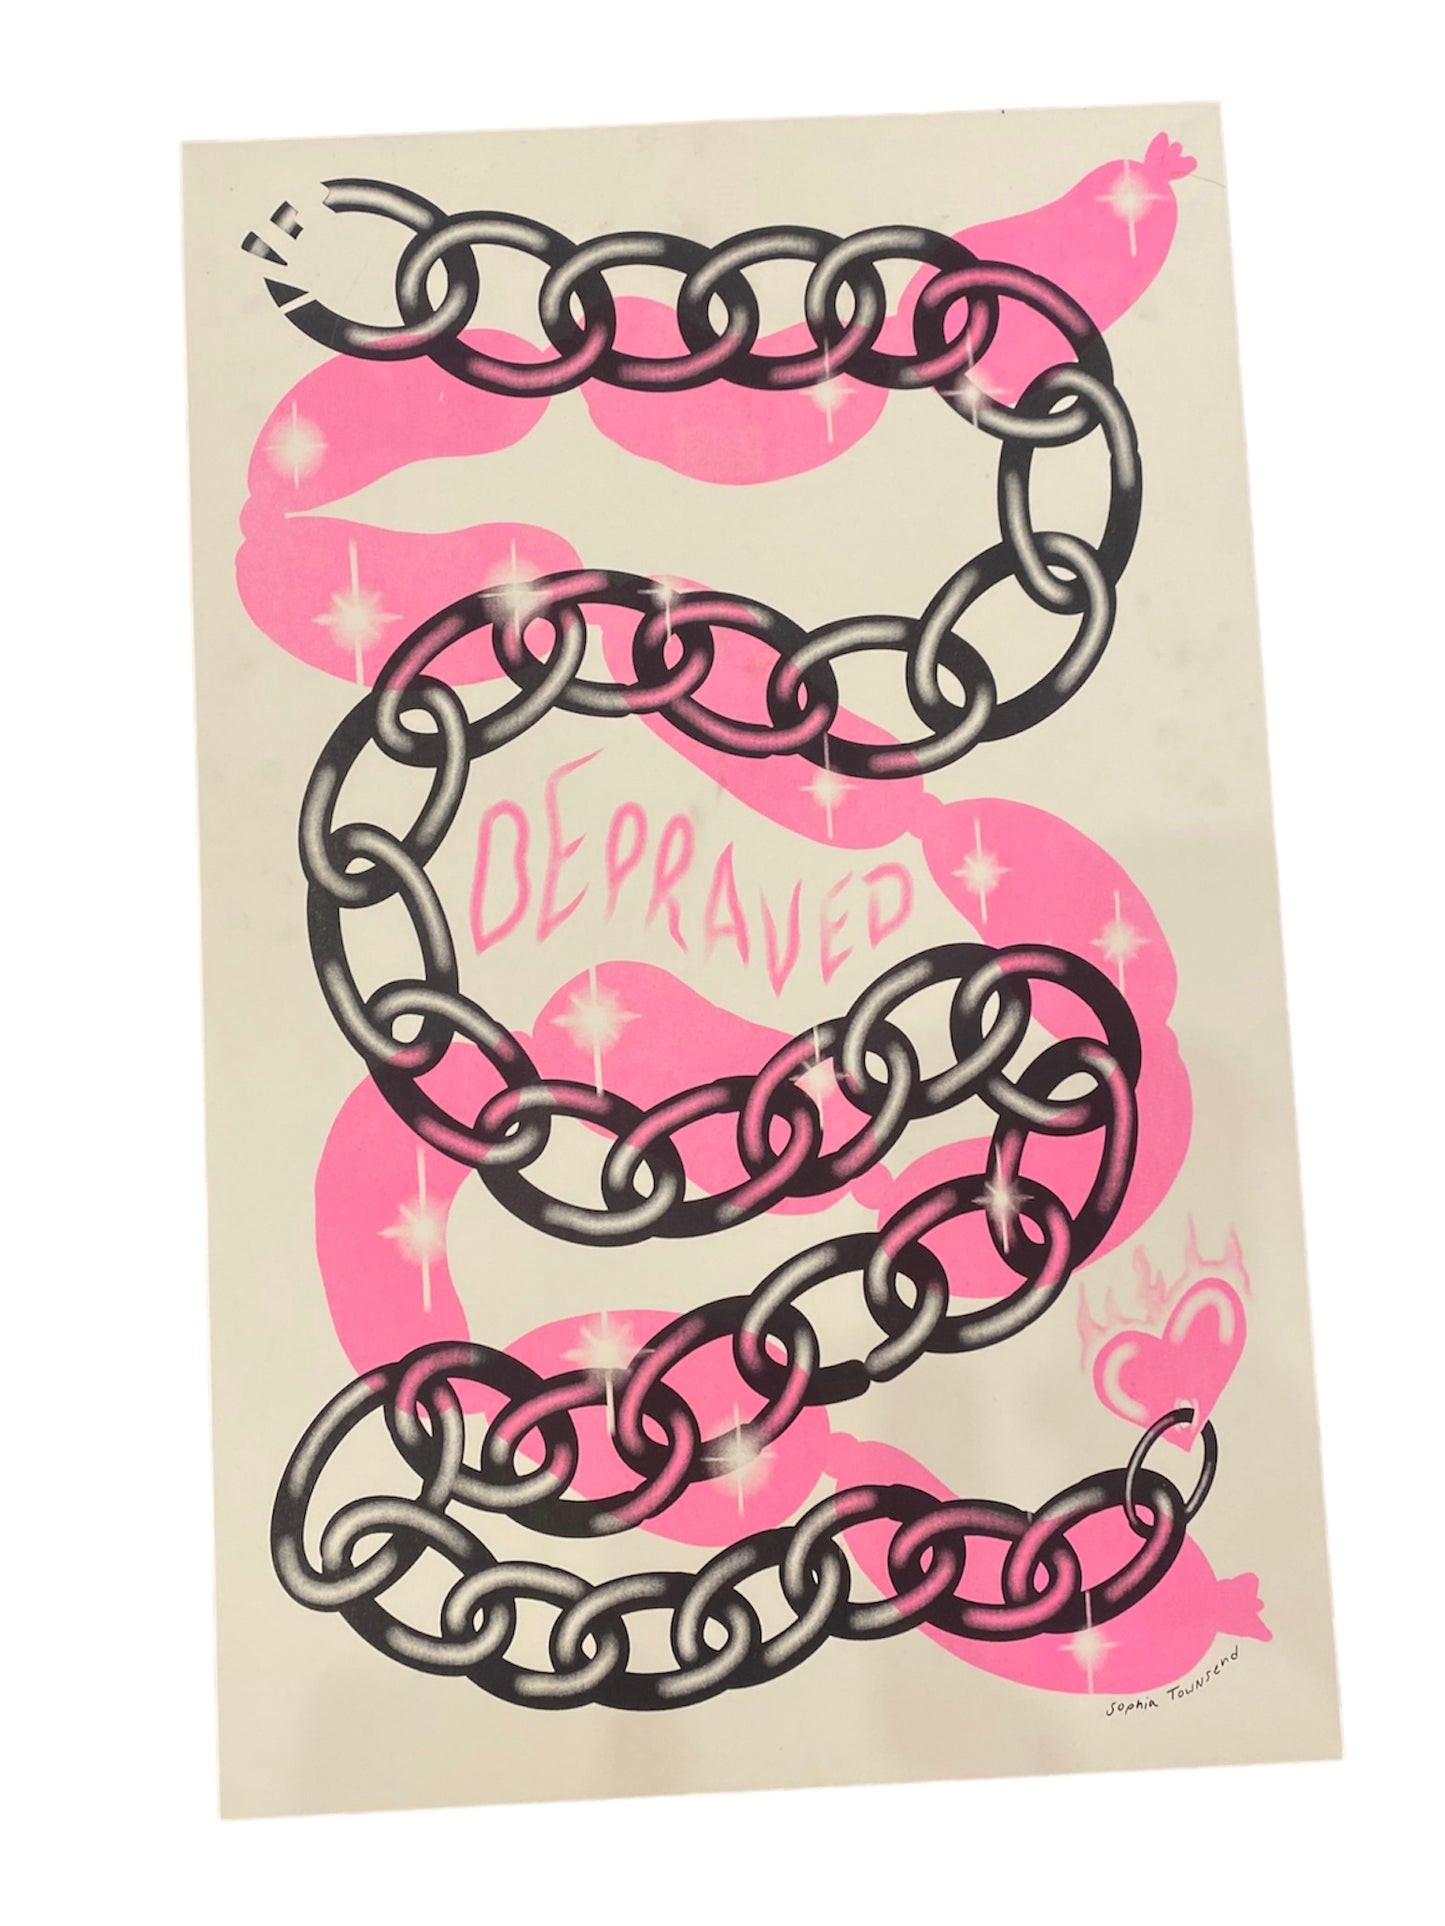 Handmade ‘Depraved’ Risograph Print by Stoopid Chic